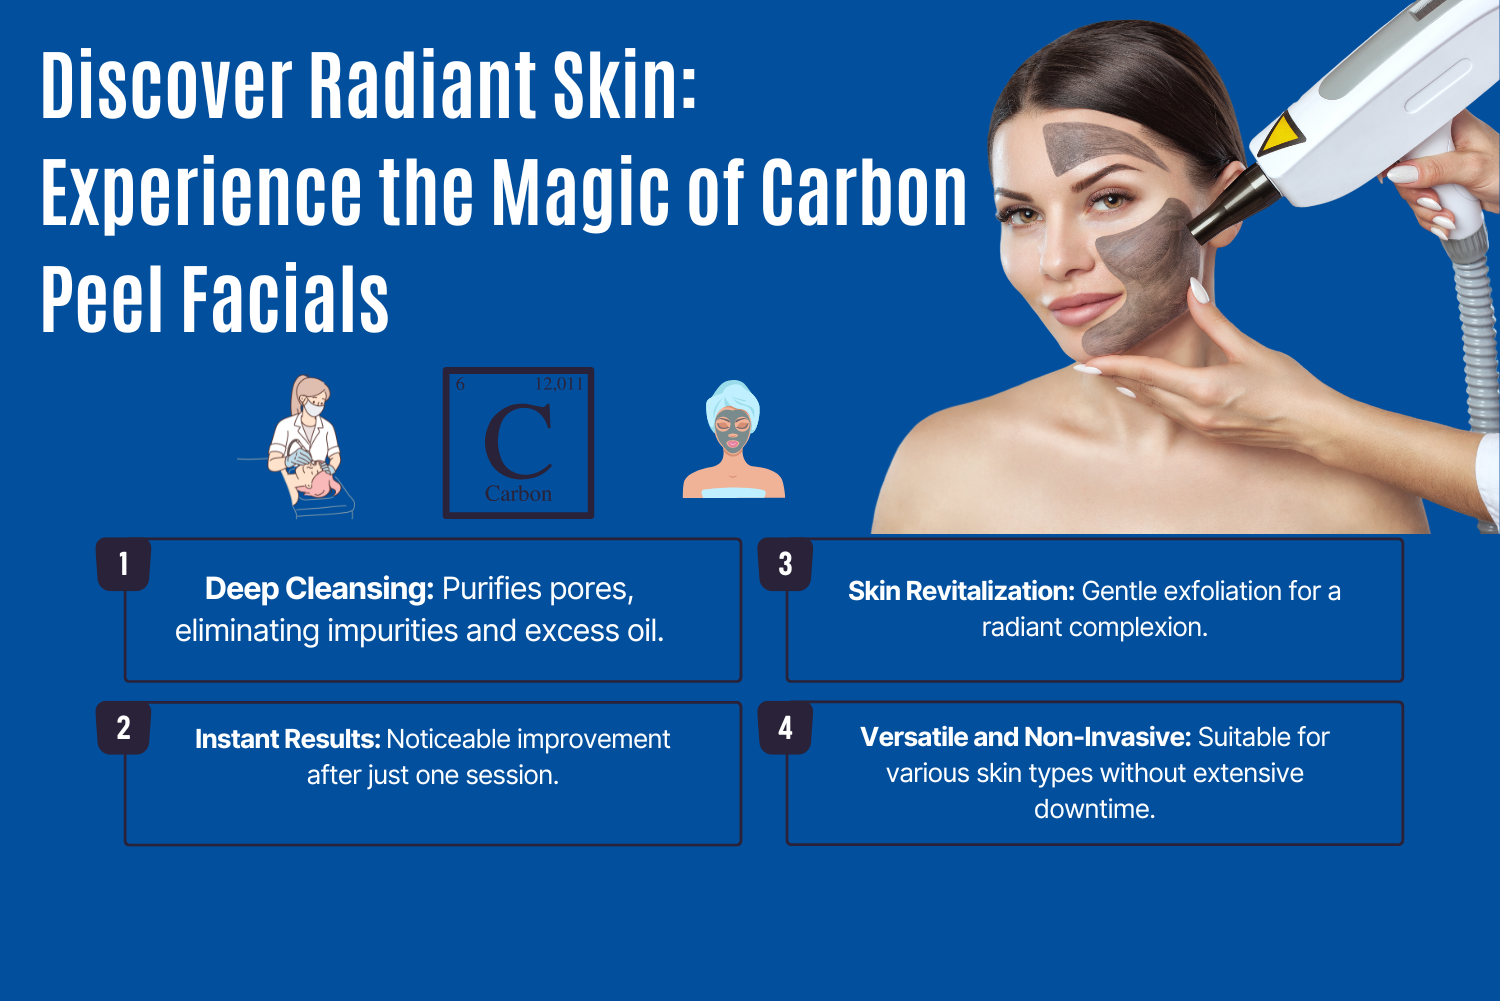 Discover Radiant Skin Experience the Magic of Carbon Peel Facials